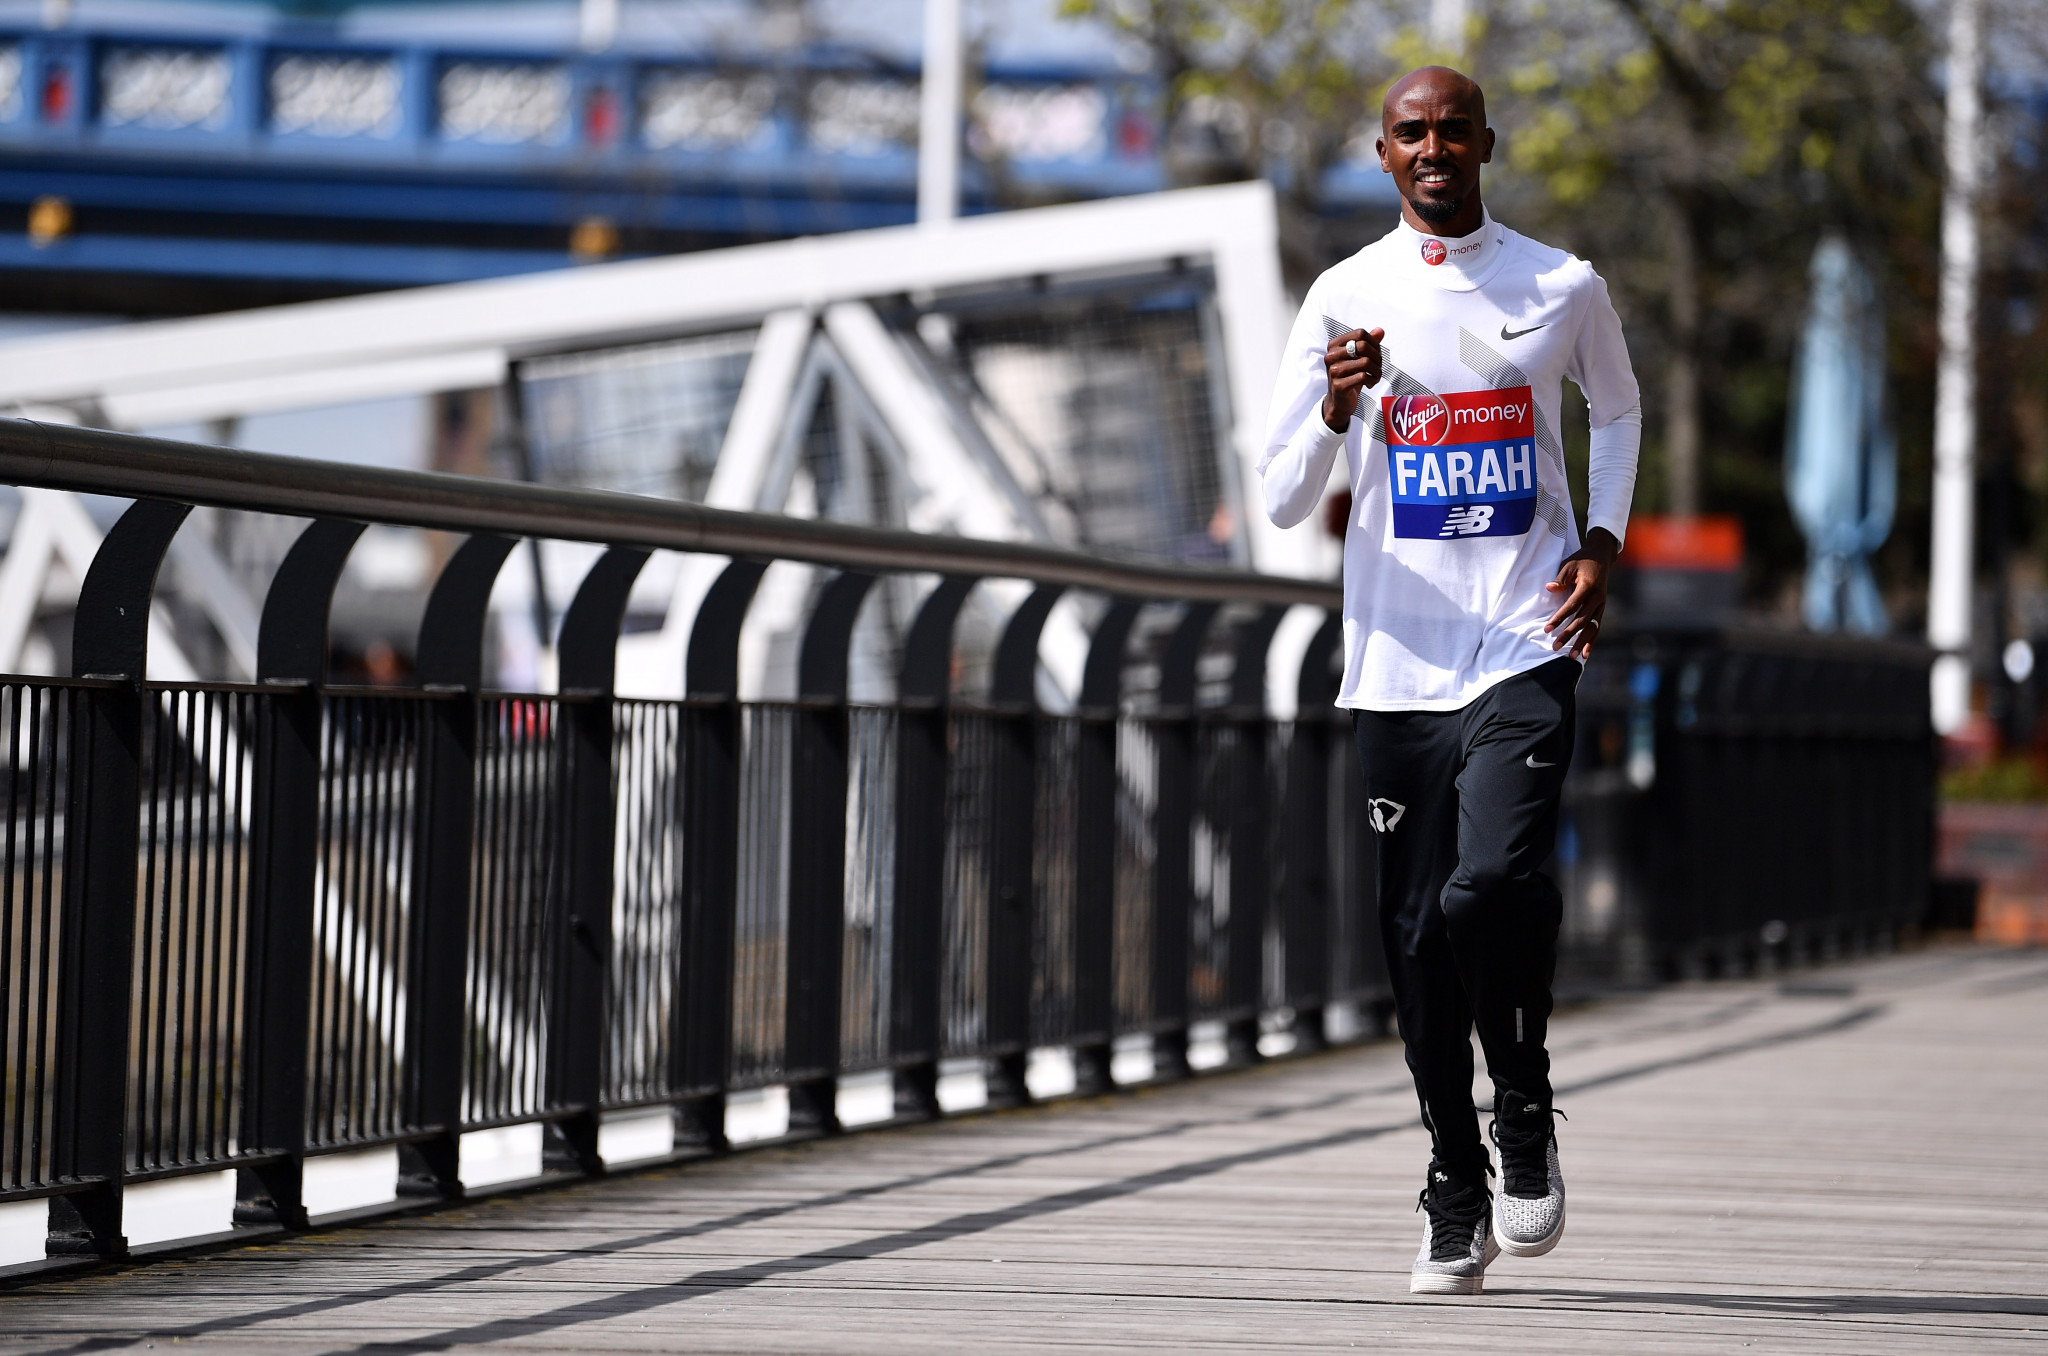 Sir Mo admits improvement needed in bid for Tokyo 2020 medal prior to first marathon for four years